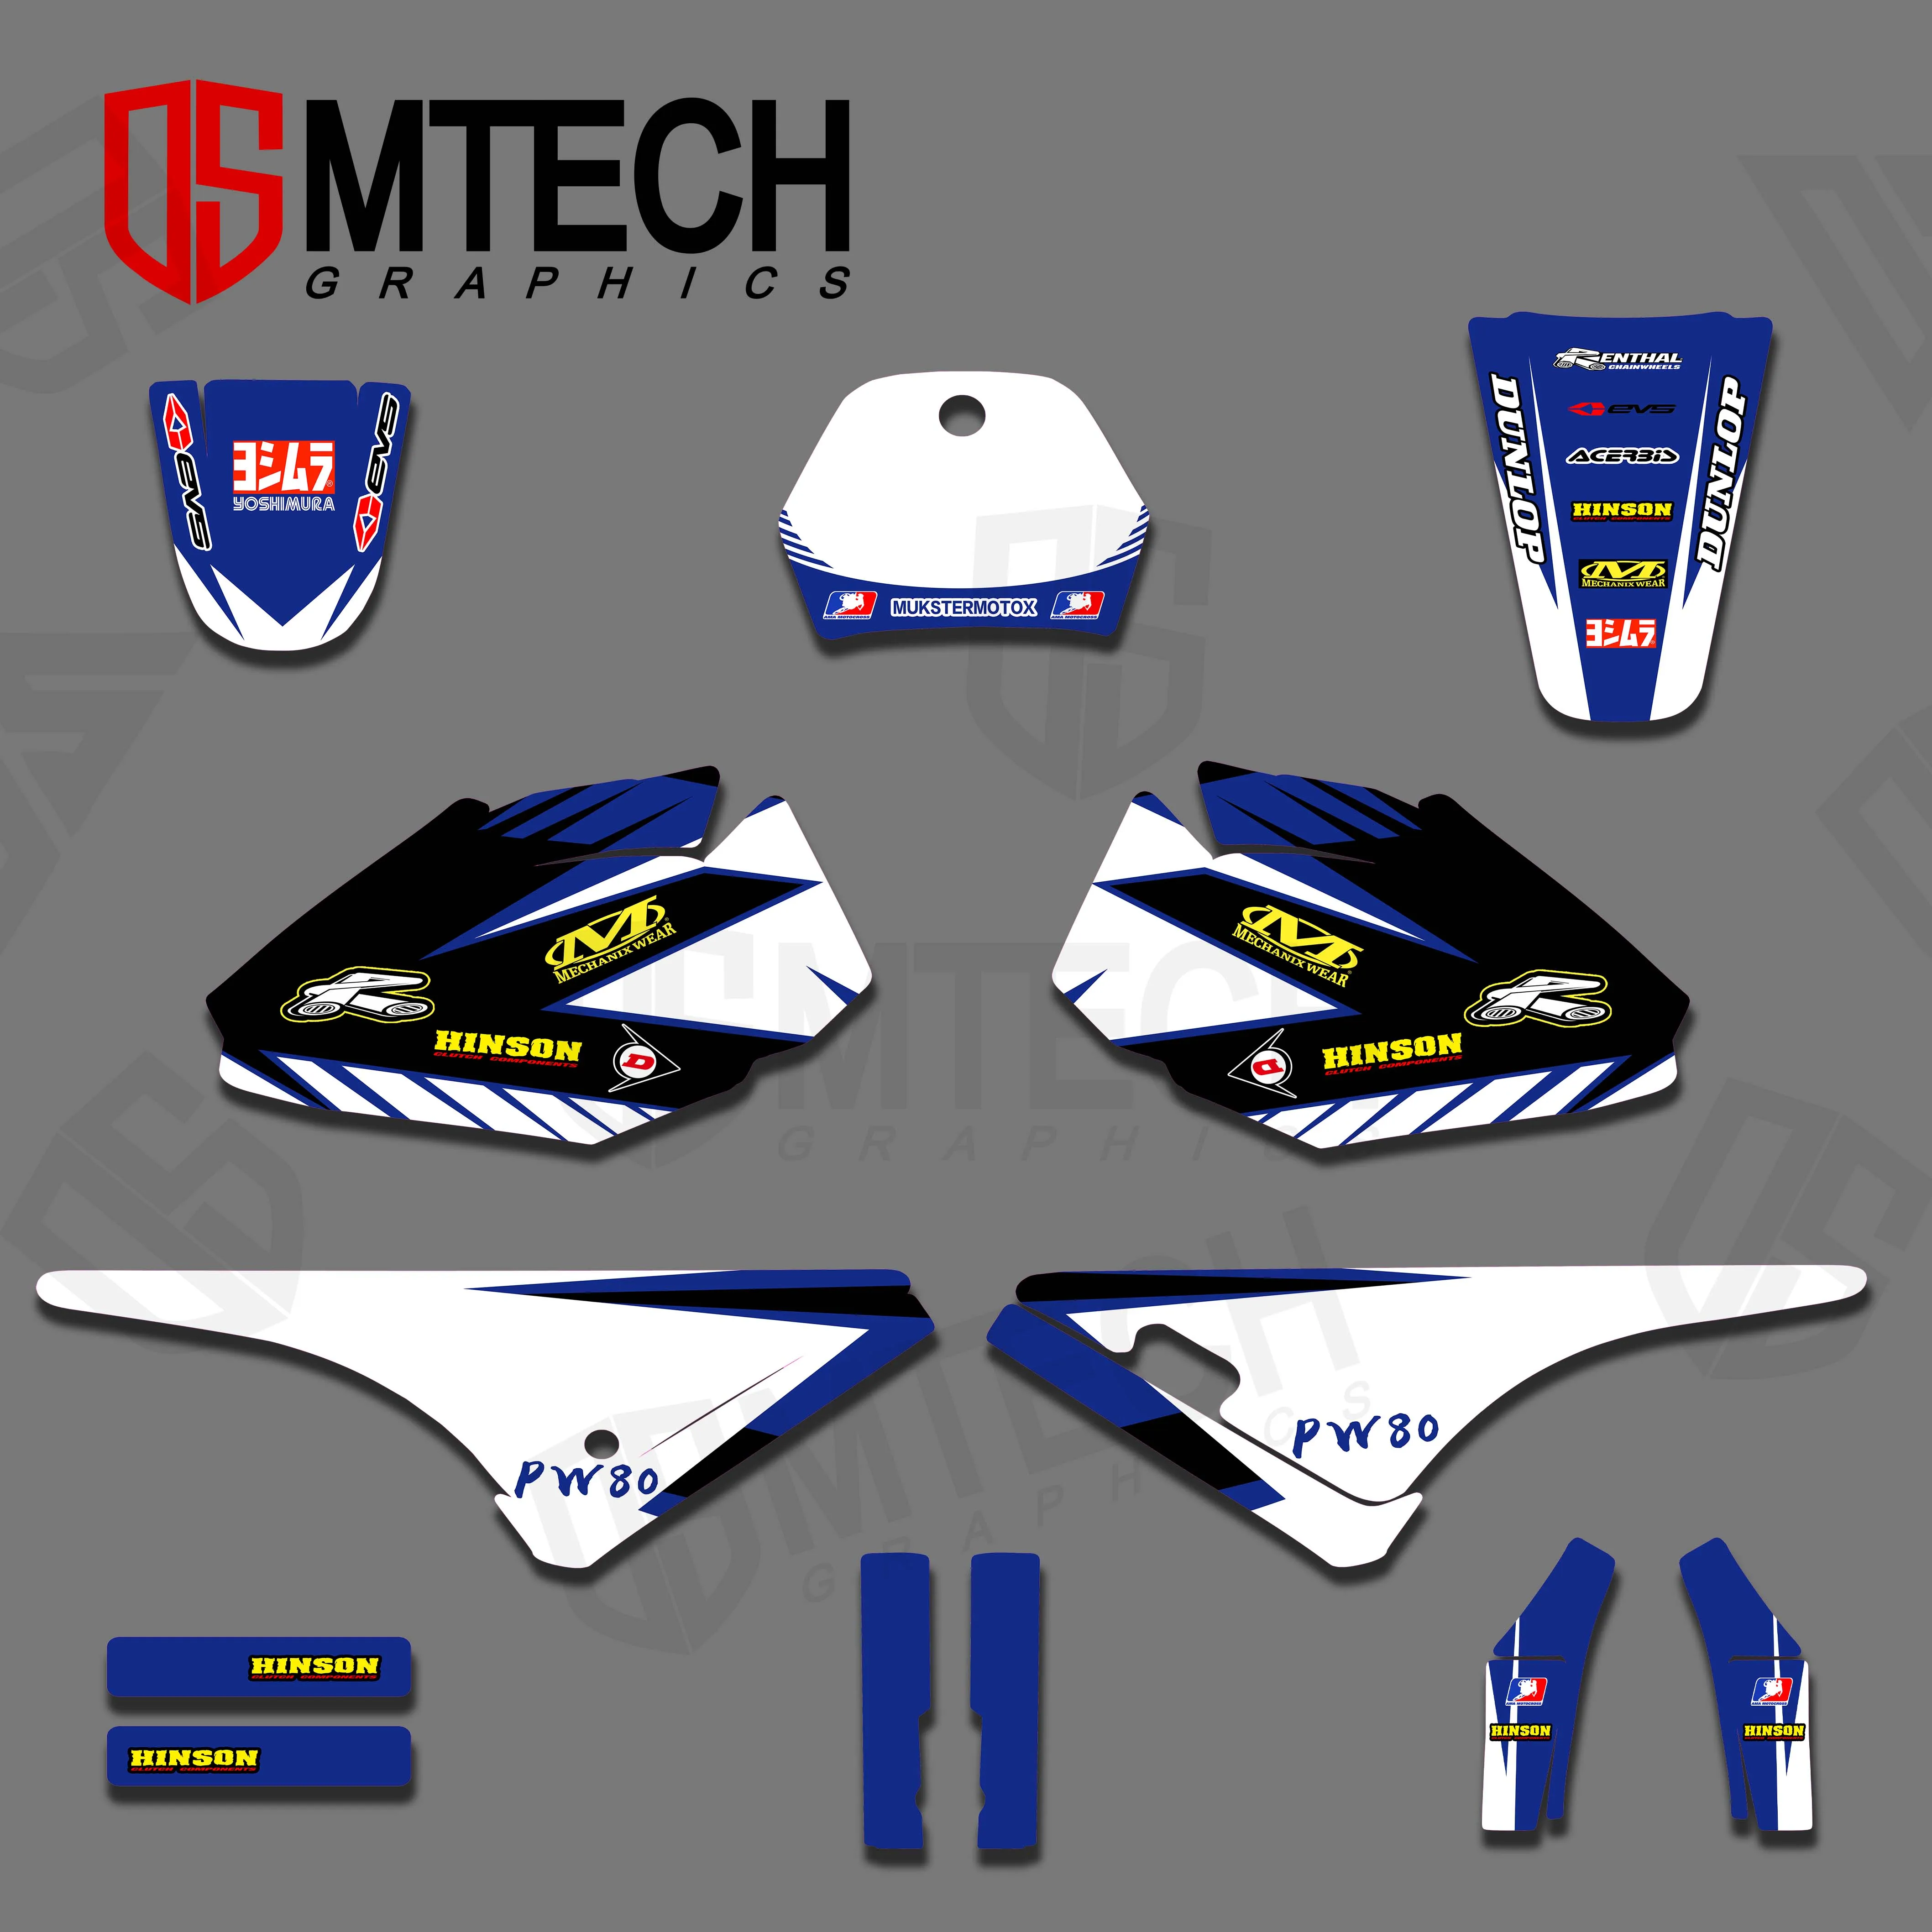 DSMTECH Motorcycle graphics decal stickers background kits For YAMAHAH pw 80 pit bike autocollants grafiques do motor sticker queen x motor custom team graphics decals stickers kit for husqvarna decal 2016 18 tc fc tx fx fs 2017 19 te fe 125 450cc 90